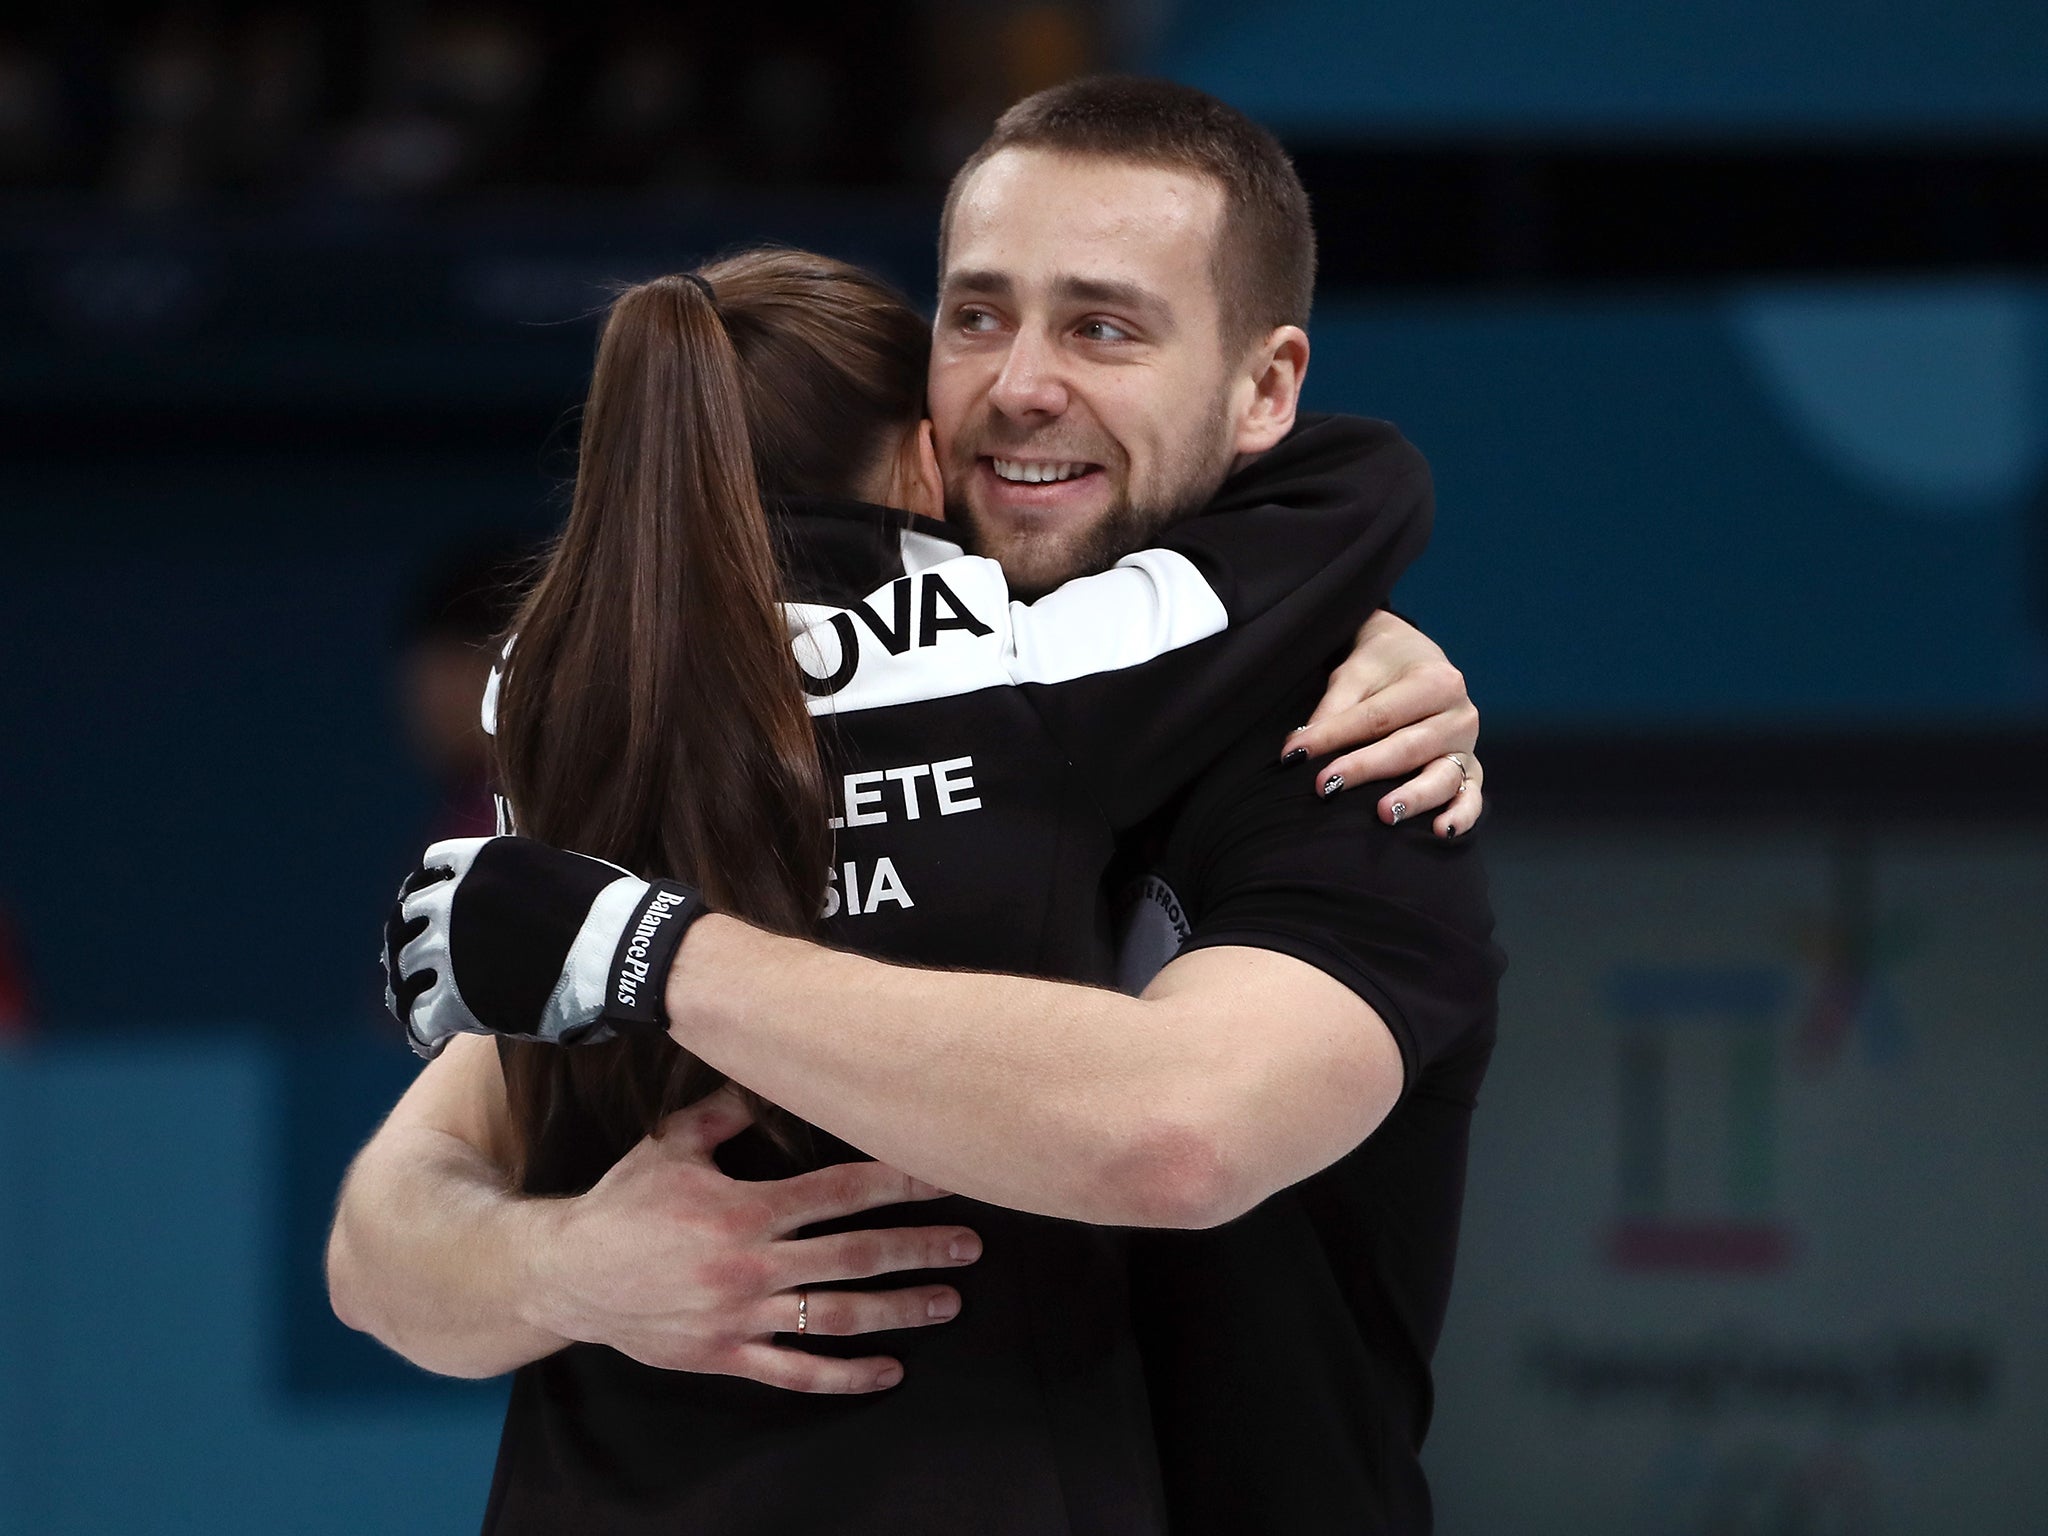 Krushelnitsky and his wife Anastasia Bryzgalova face losing their bronze medals